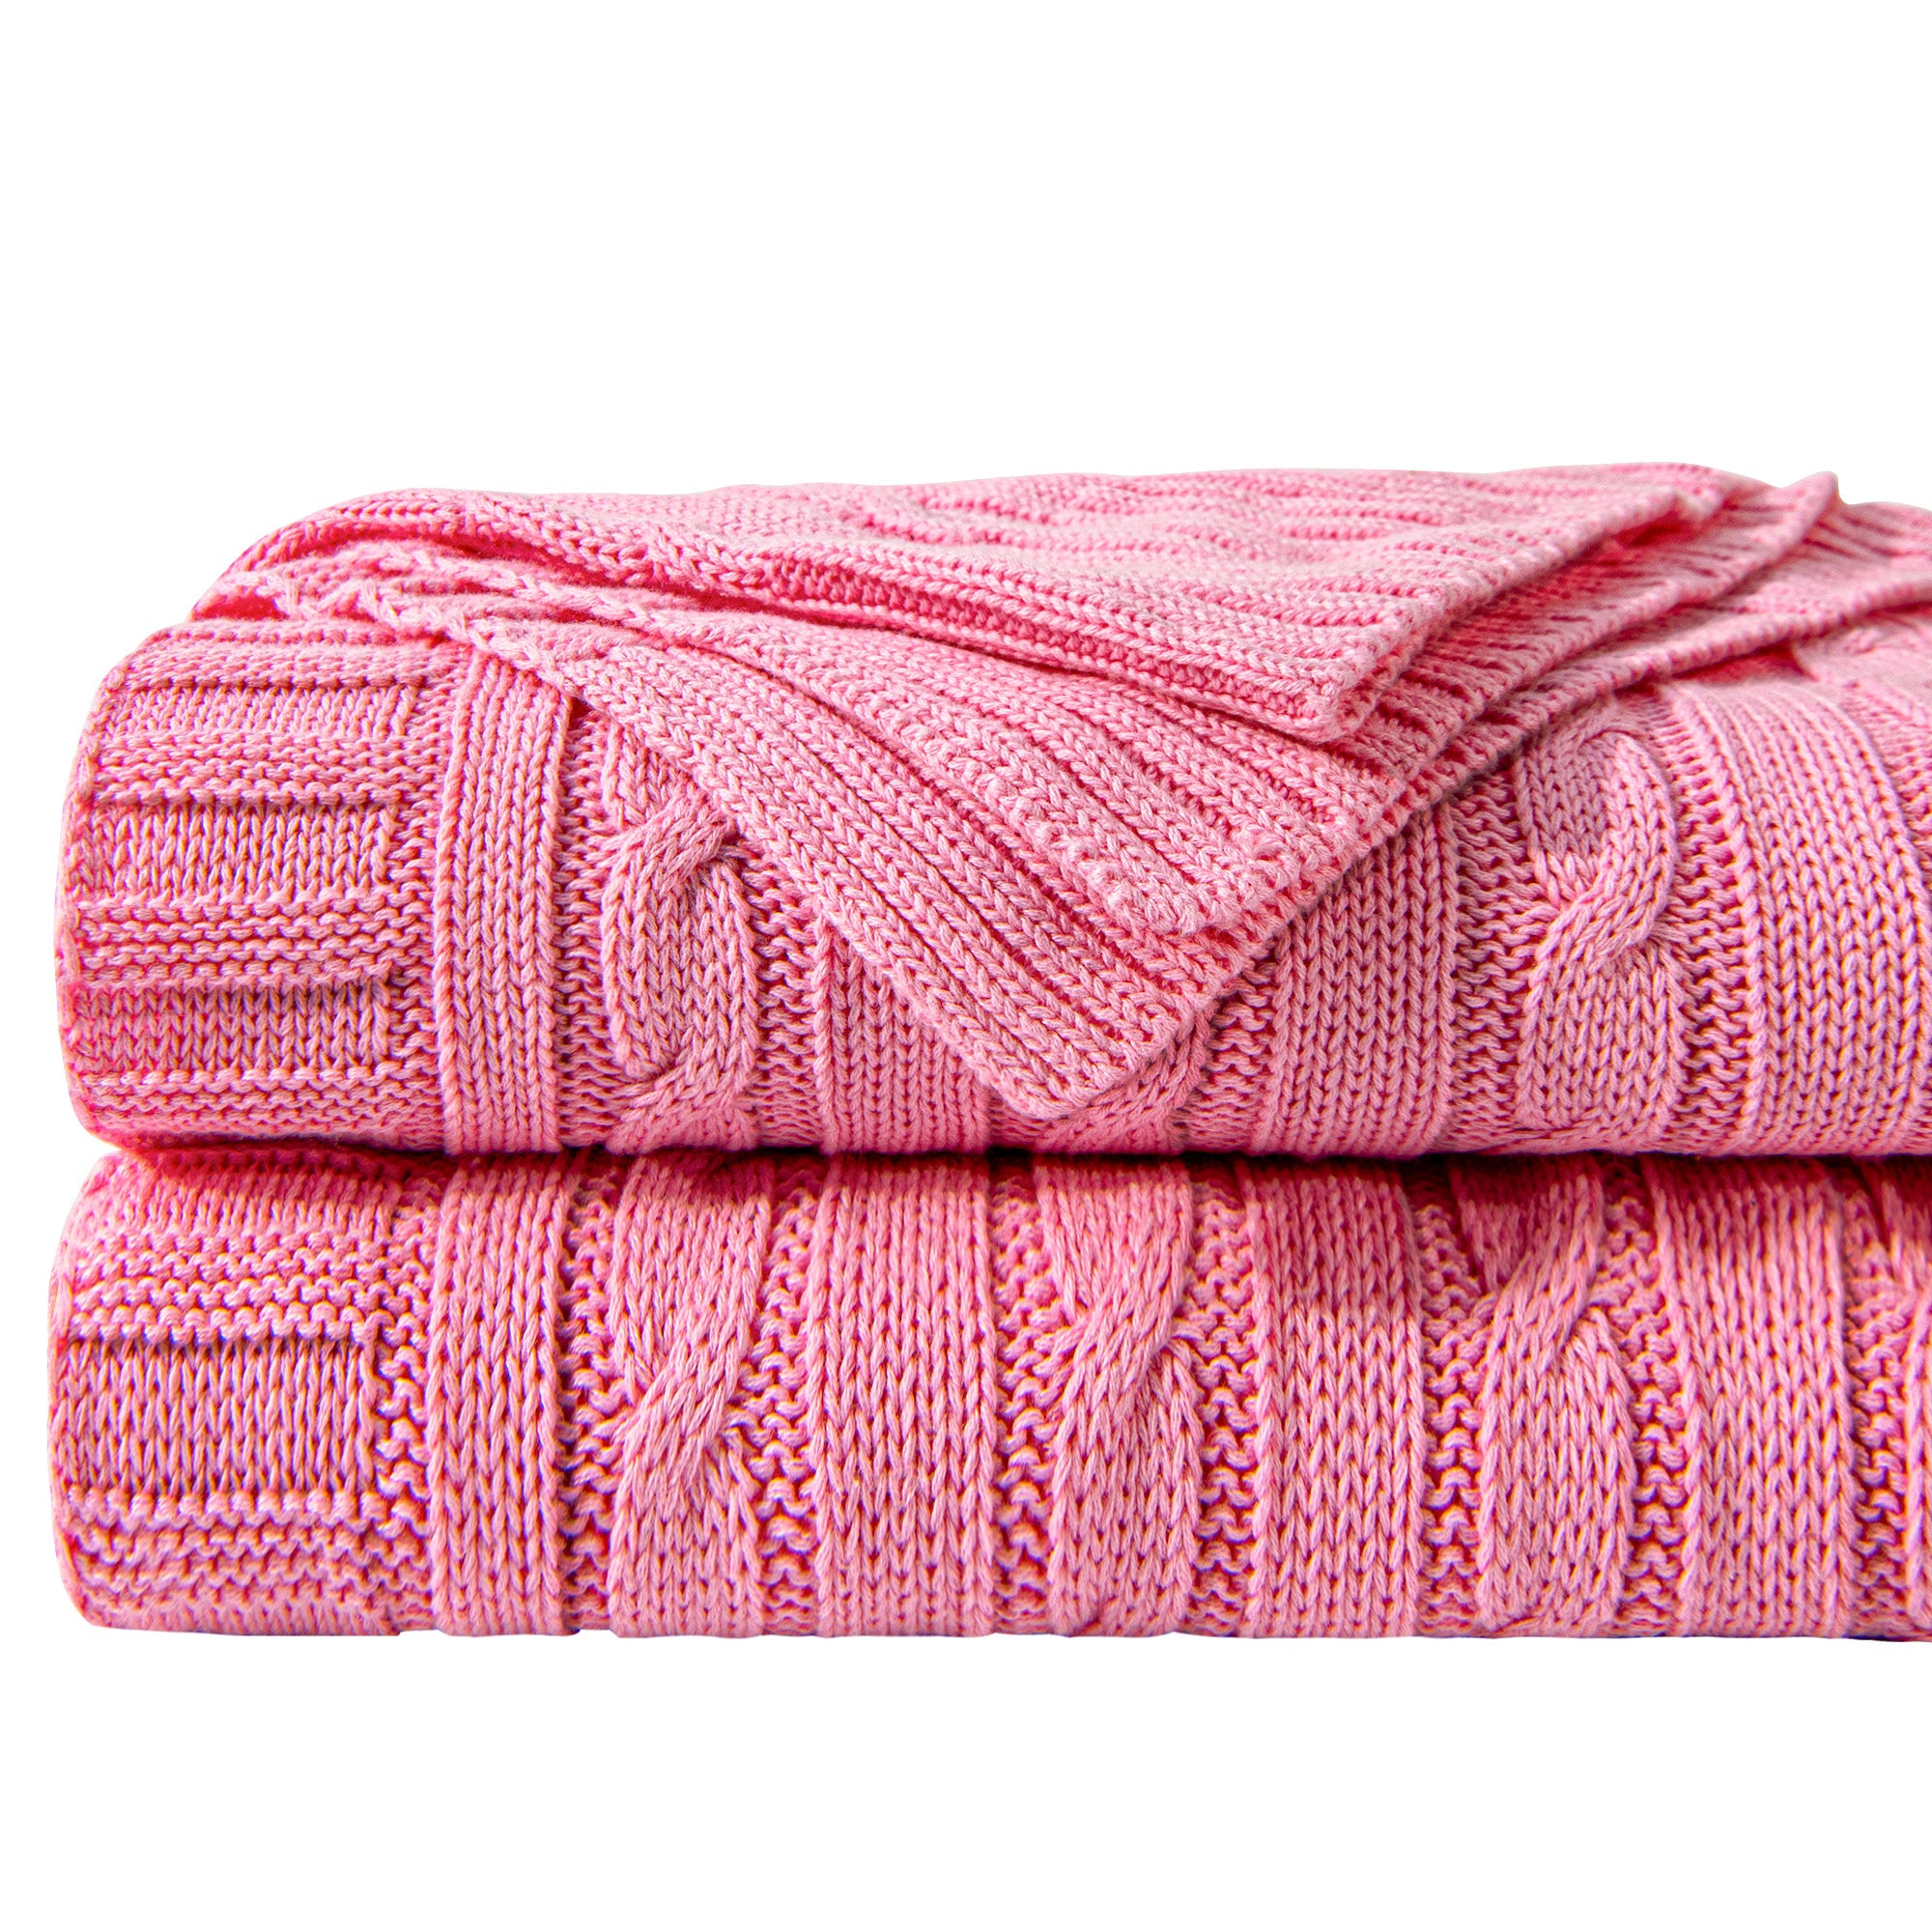 A Colorful Blanket made with 24/7 Cotton!